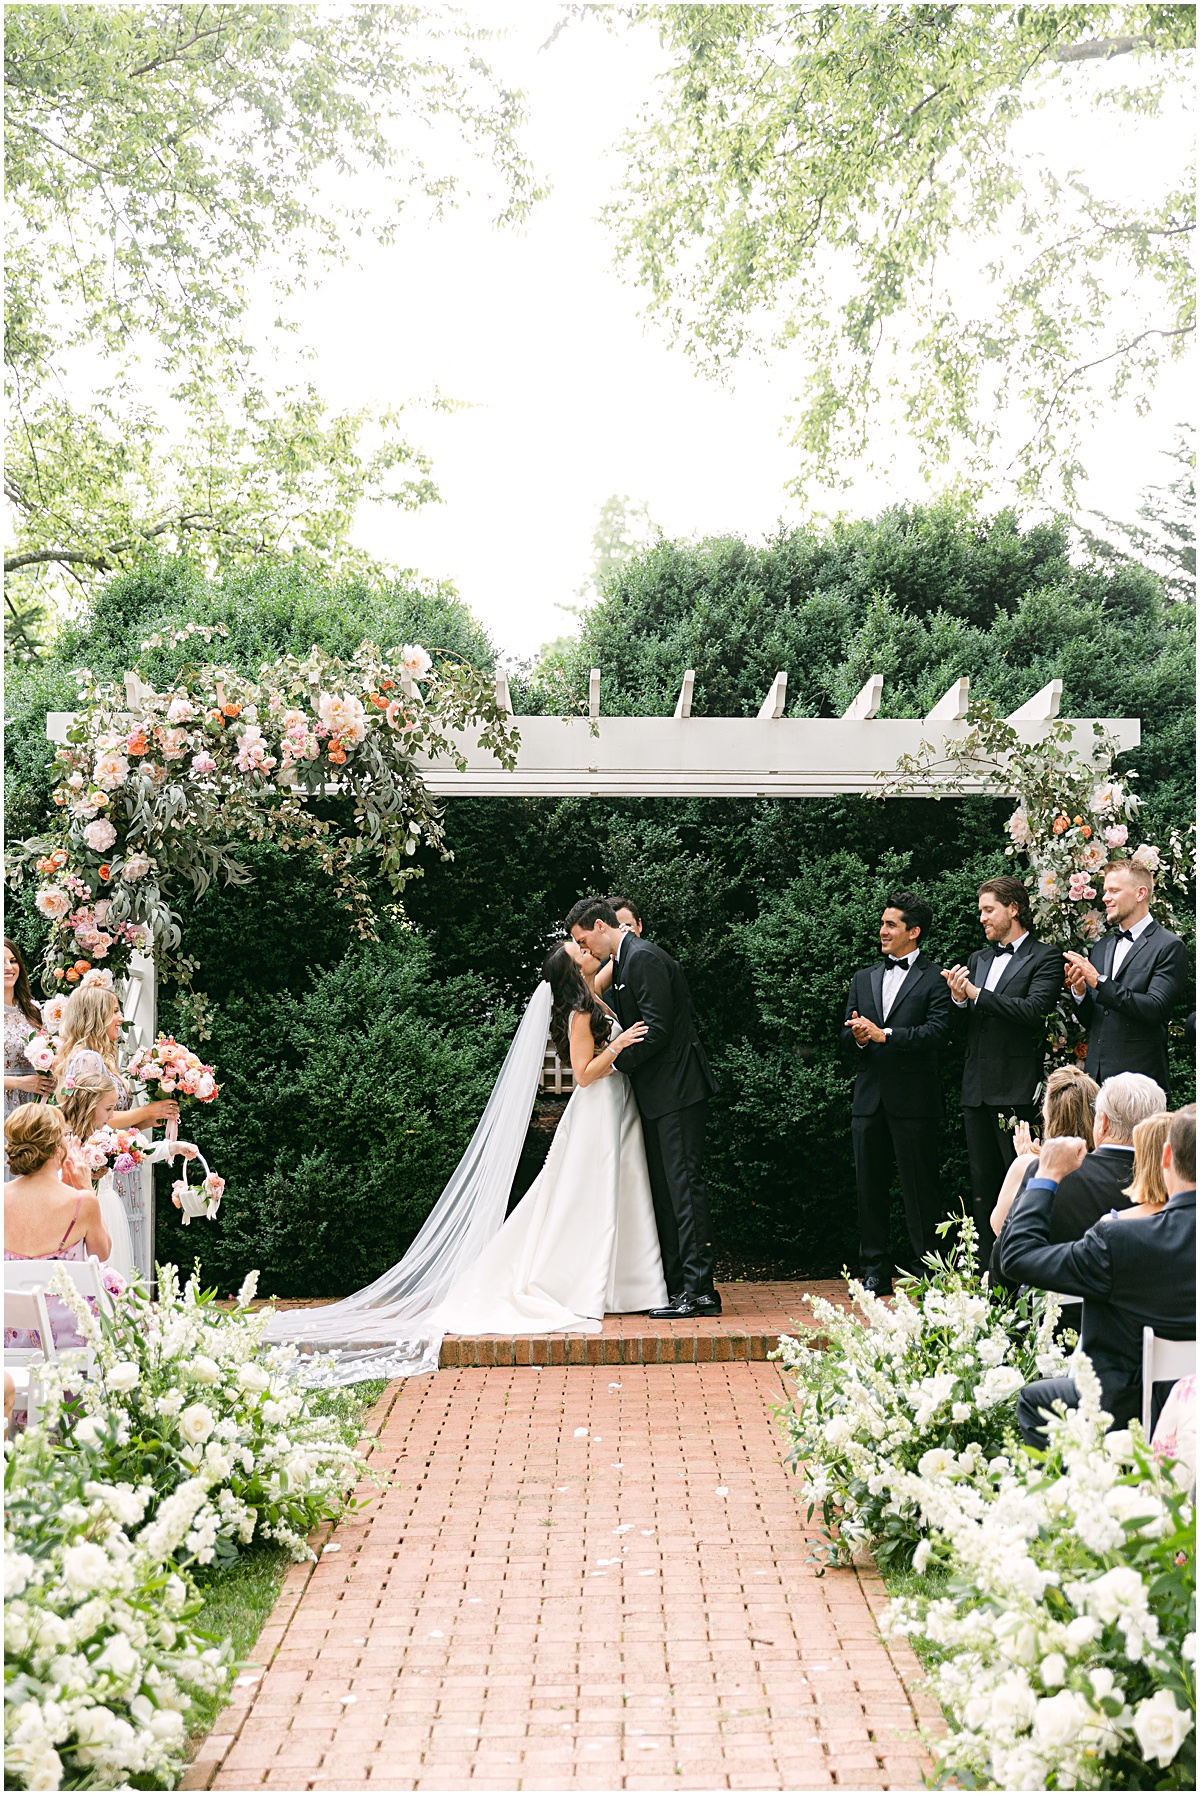 First kiss. Joyful summer wedding at the Inn at Willow Grove by Sarah Bradshaw. Planning by Kelley Cannon Events.